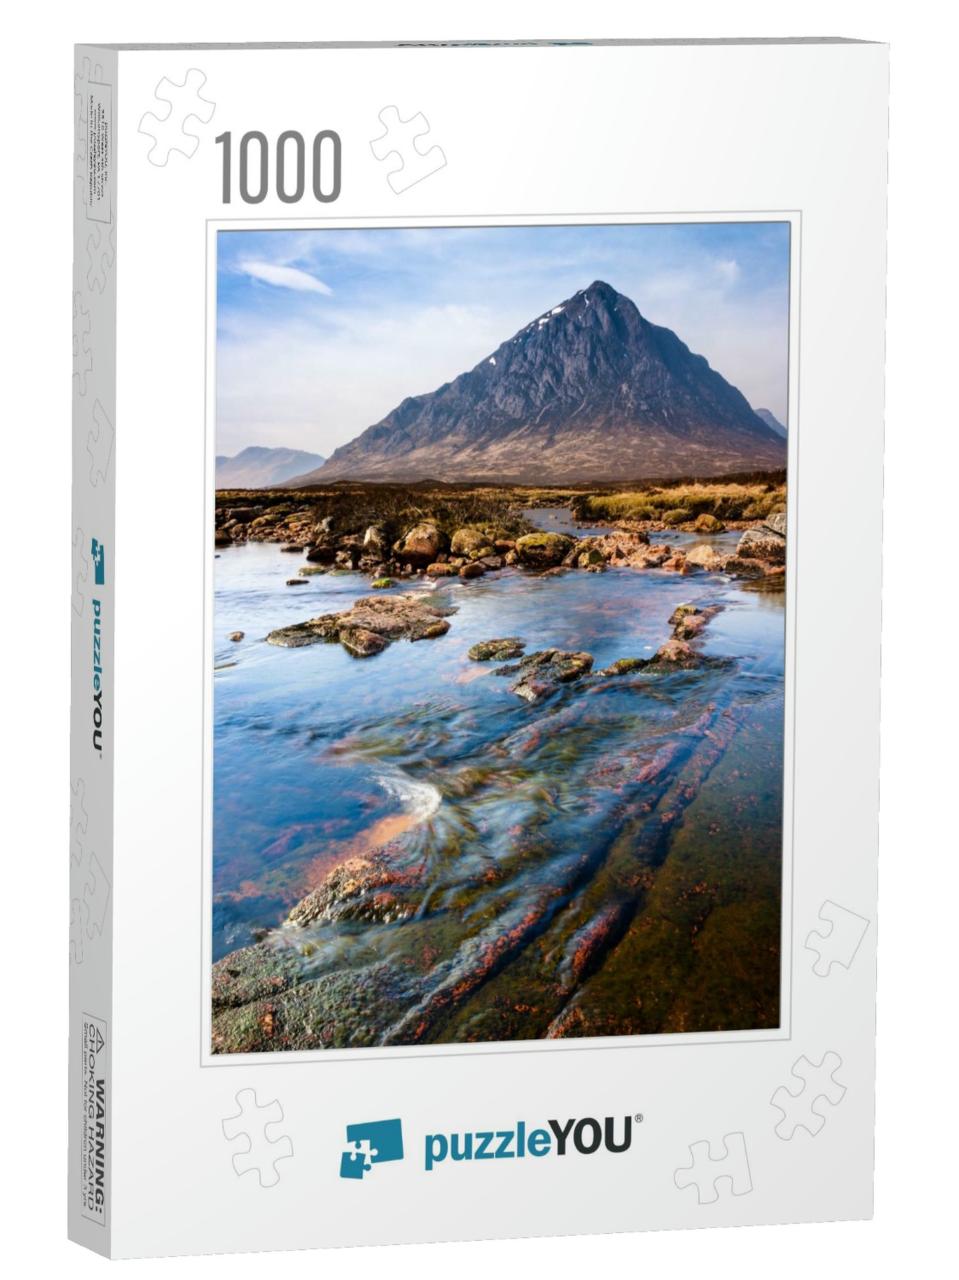 Photo of Scottish Highlands Landscape Scene from the Rive... Jigsaw Puzzle with 1000 pieces